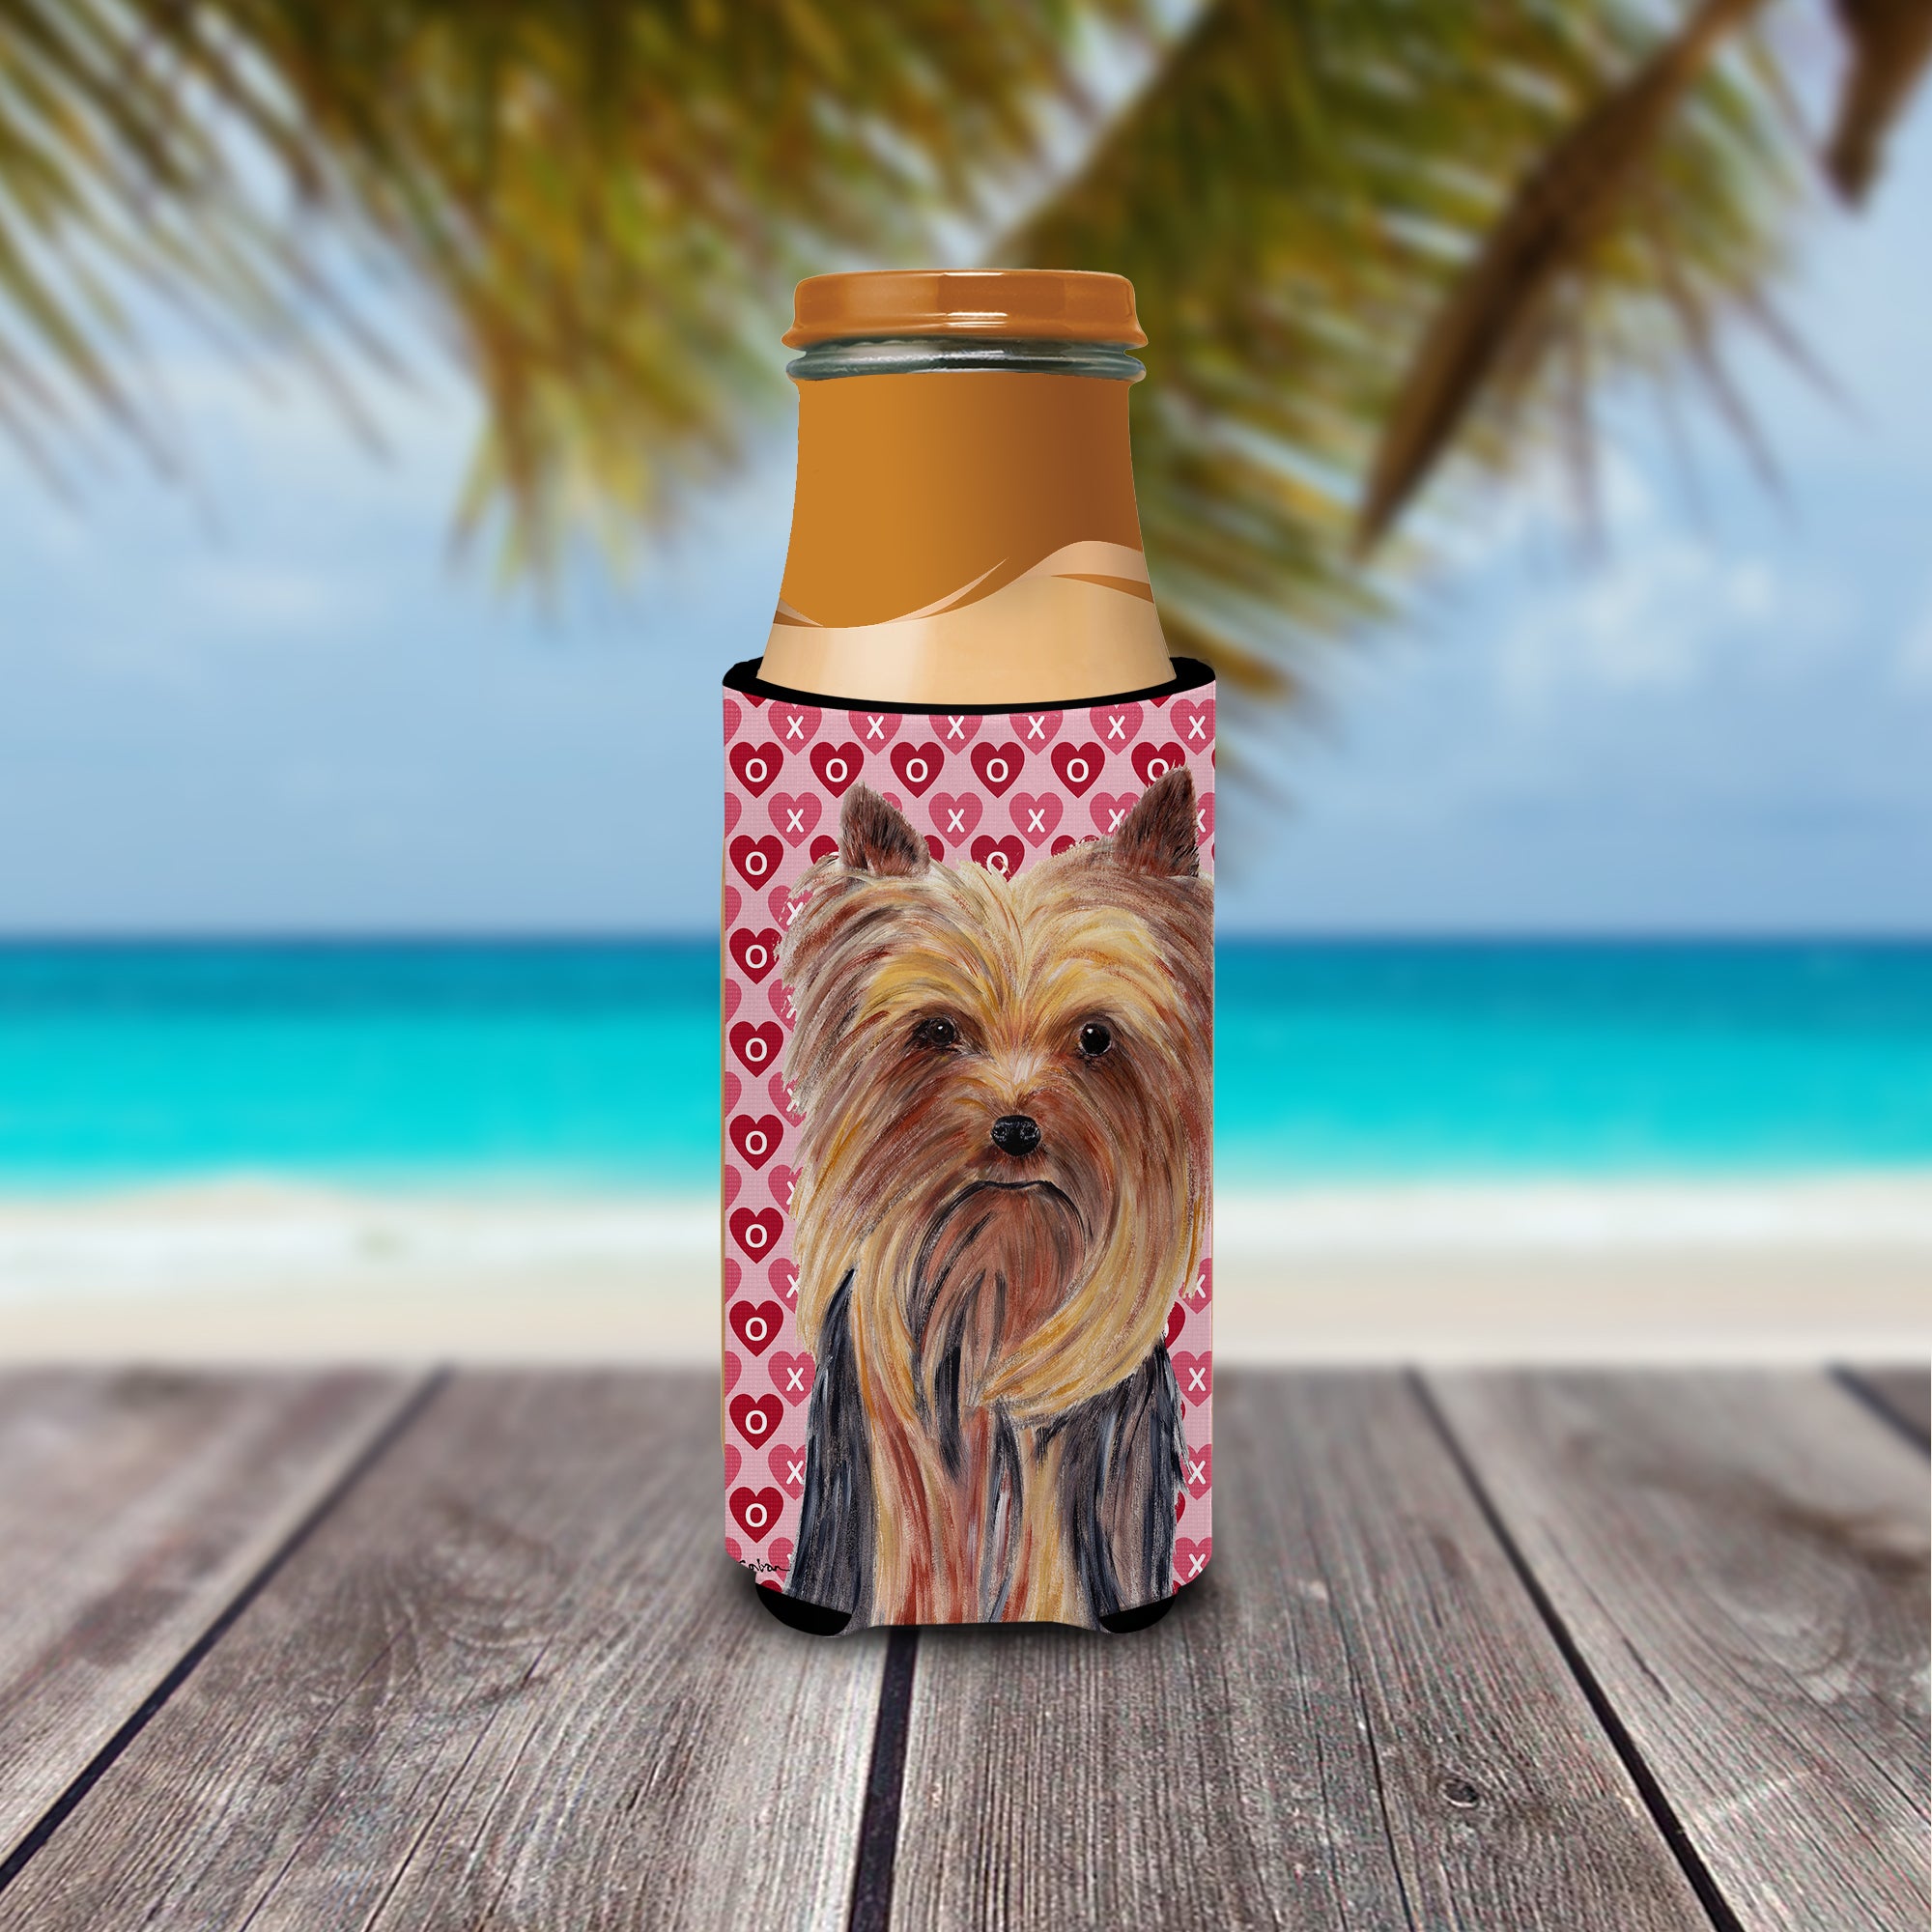 Yorkie Hearts Love and Valentine's Day Portrait Ultra Beverage Insulators for slim cans SC9274MUK.